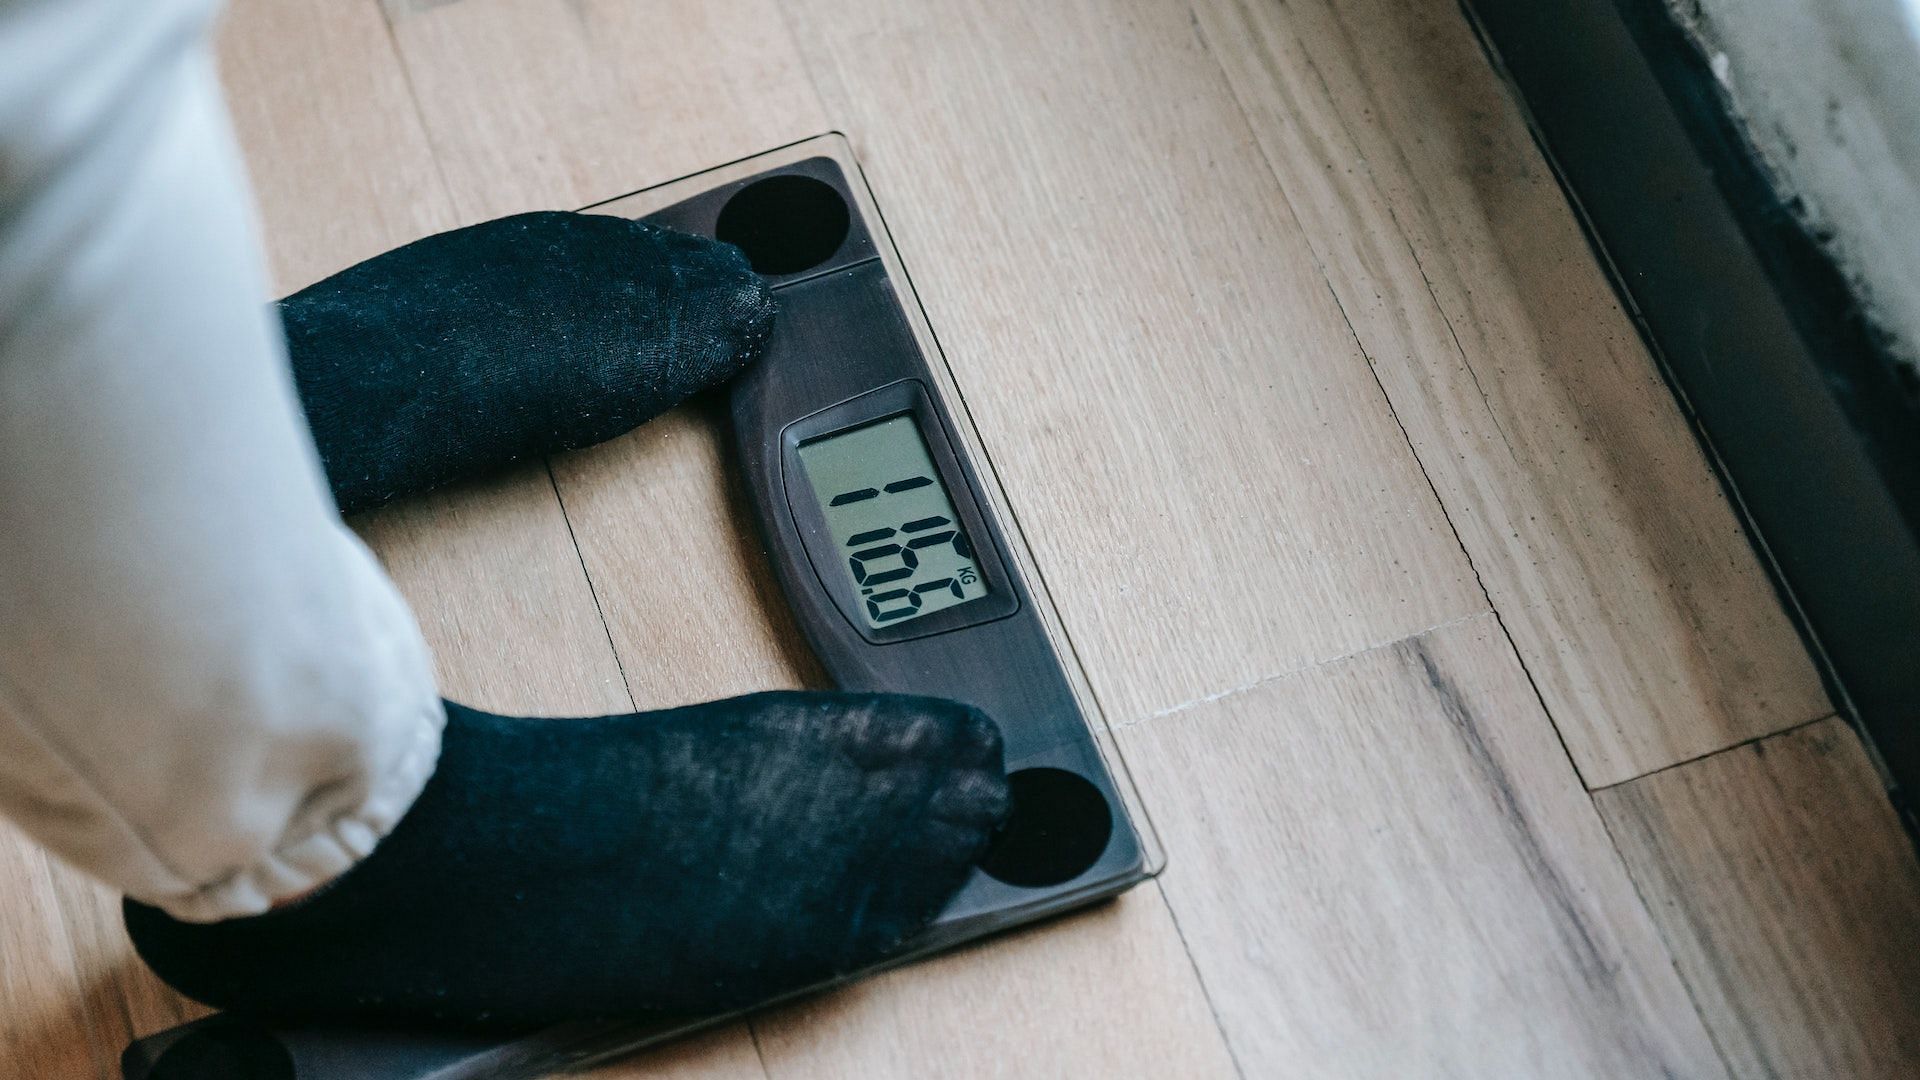 Is weight fluctuation normal? Image via Pexels/Andres Ayrton